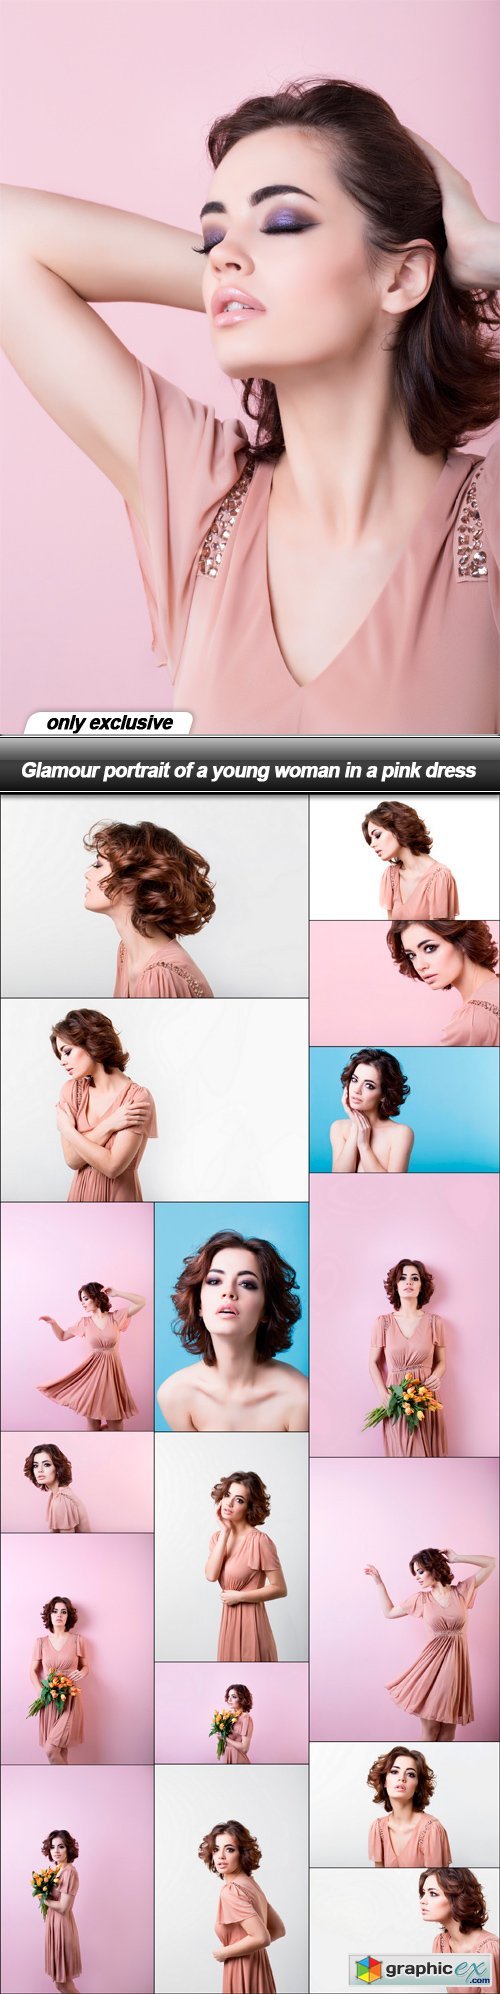 Glamour portrait of a young woman in a pink dress - 18 UHQ JPEG